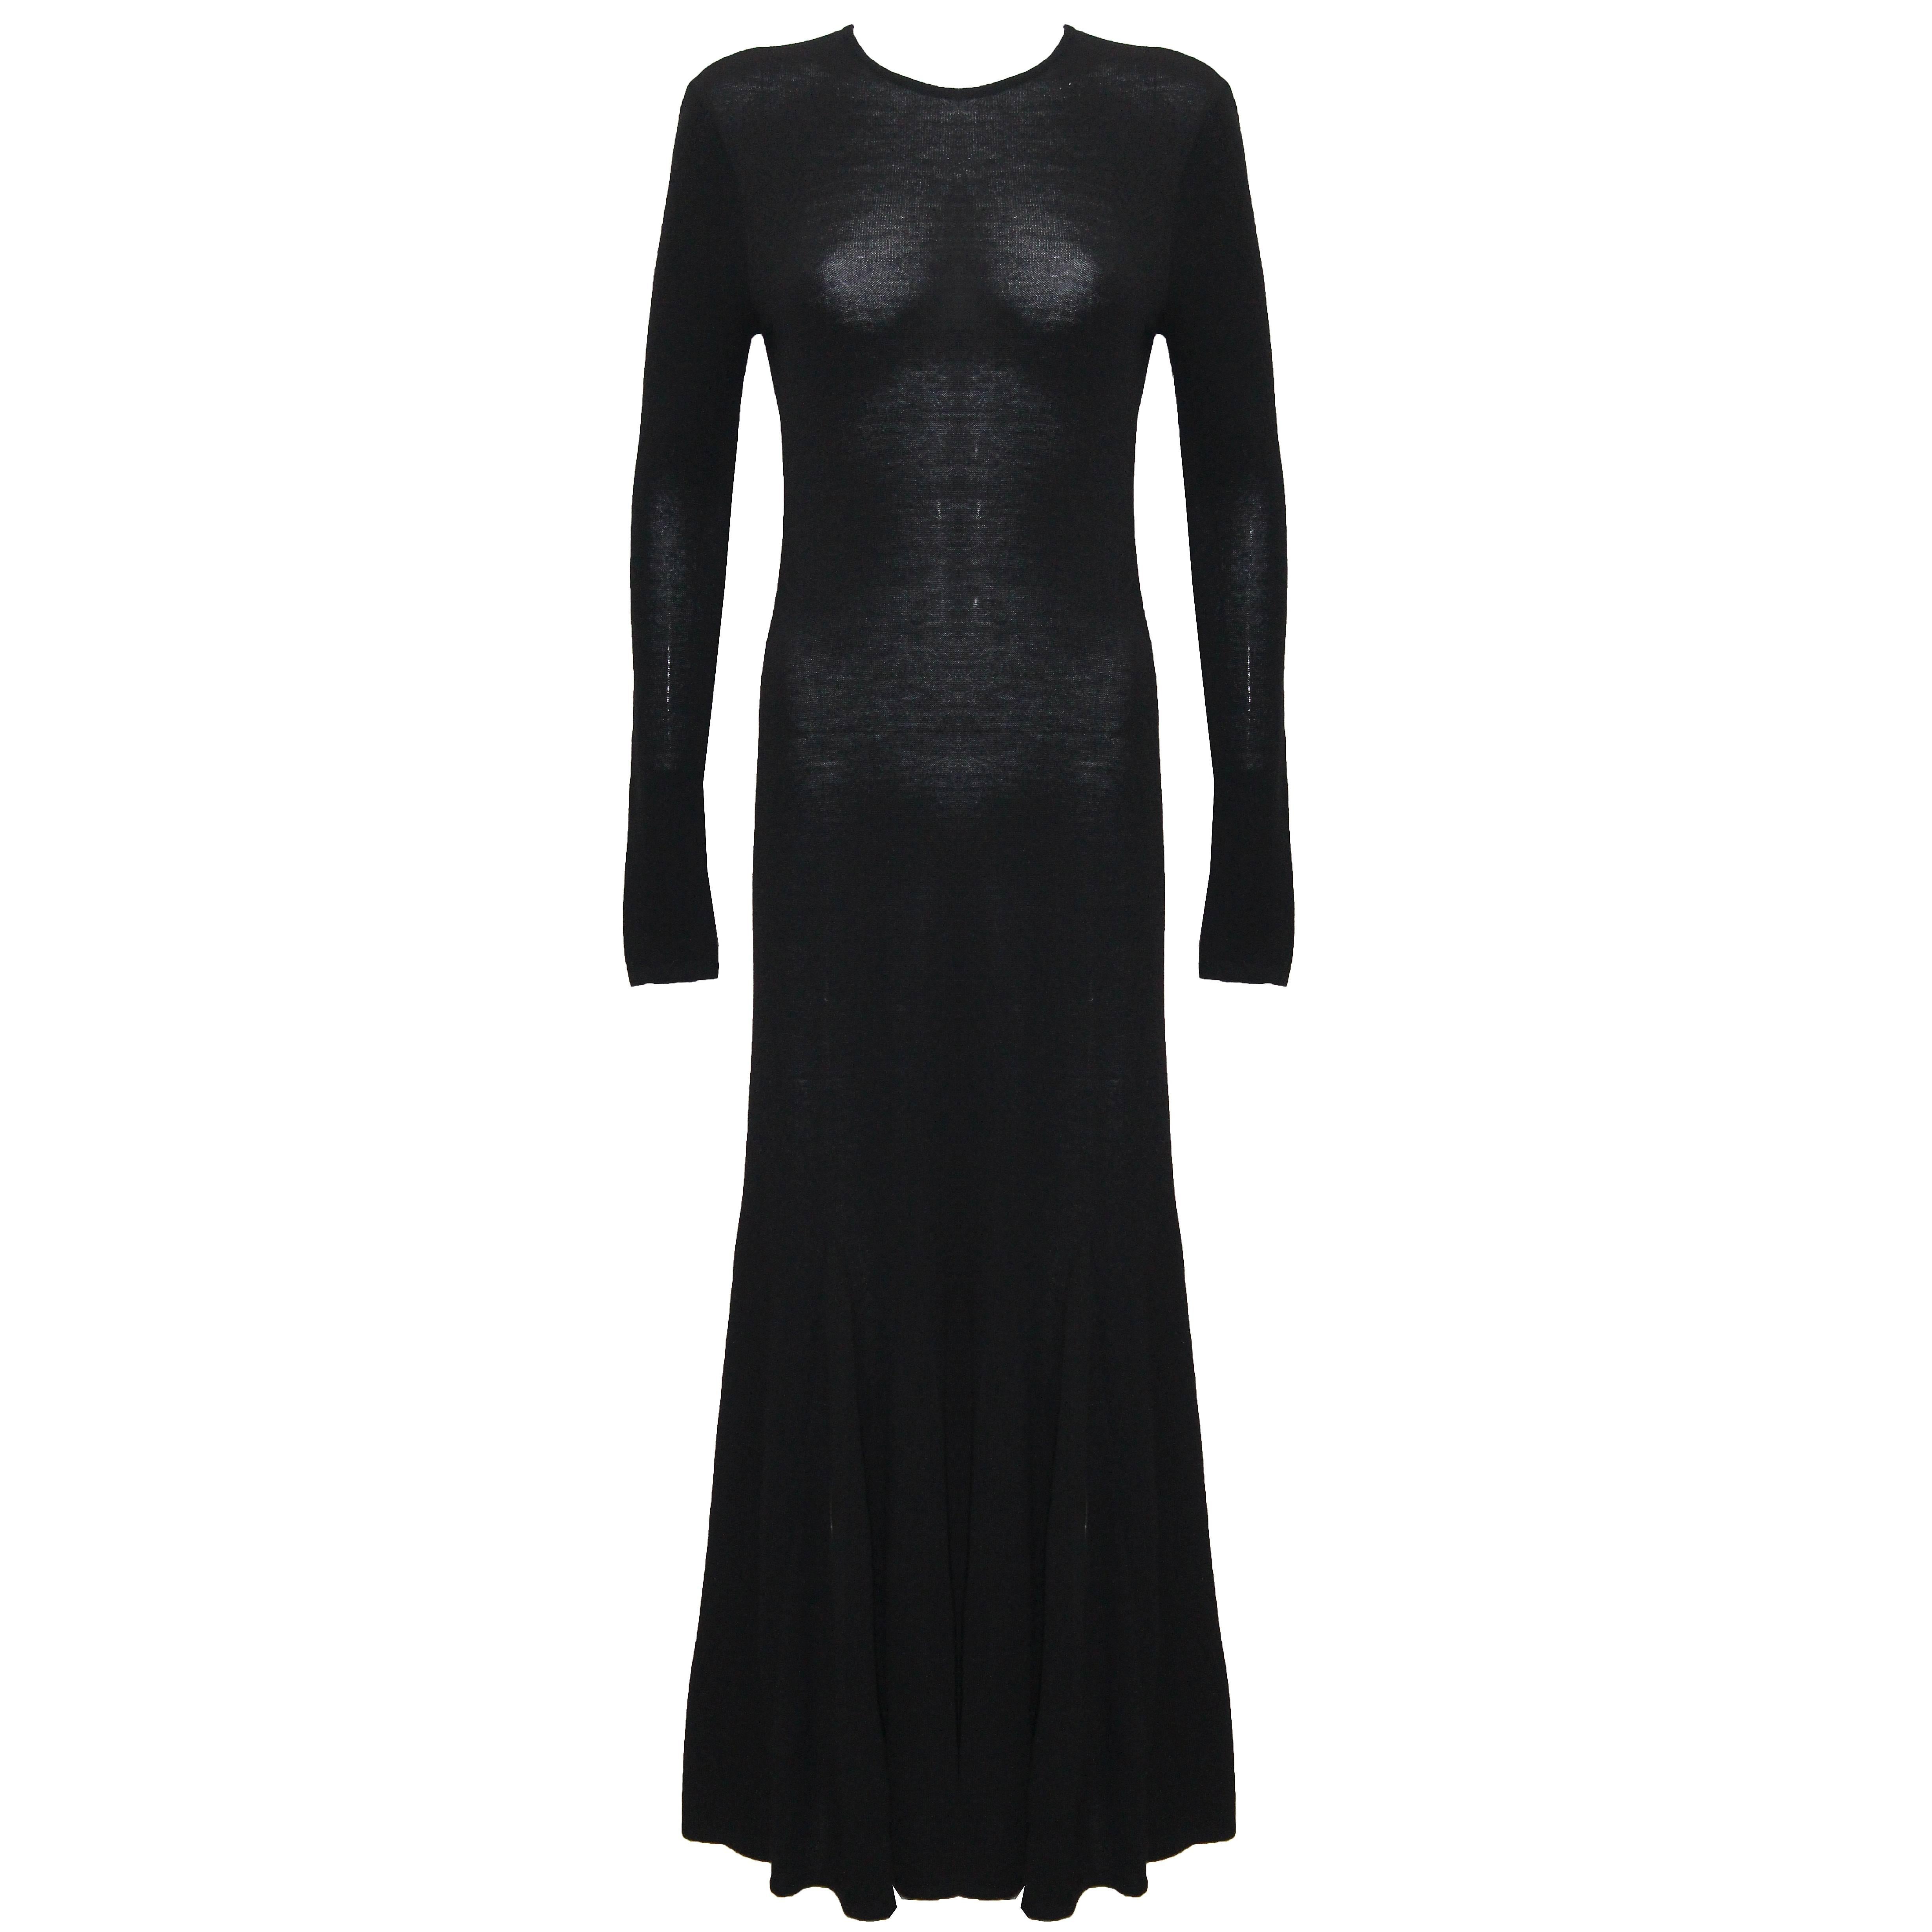 Early Tom Ford for Gucci Black Knitted Full Length Maxi Dress, Fall 1993